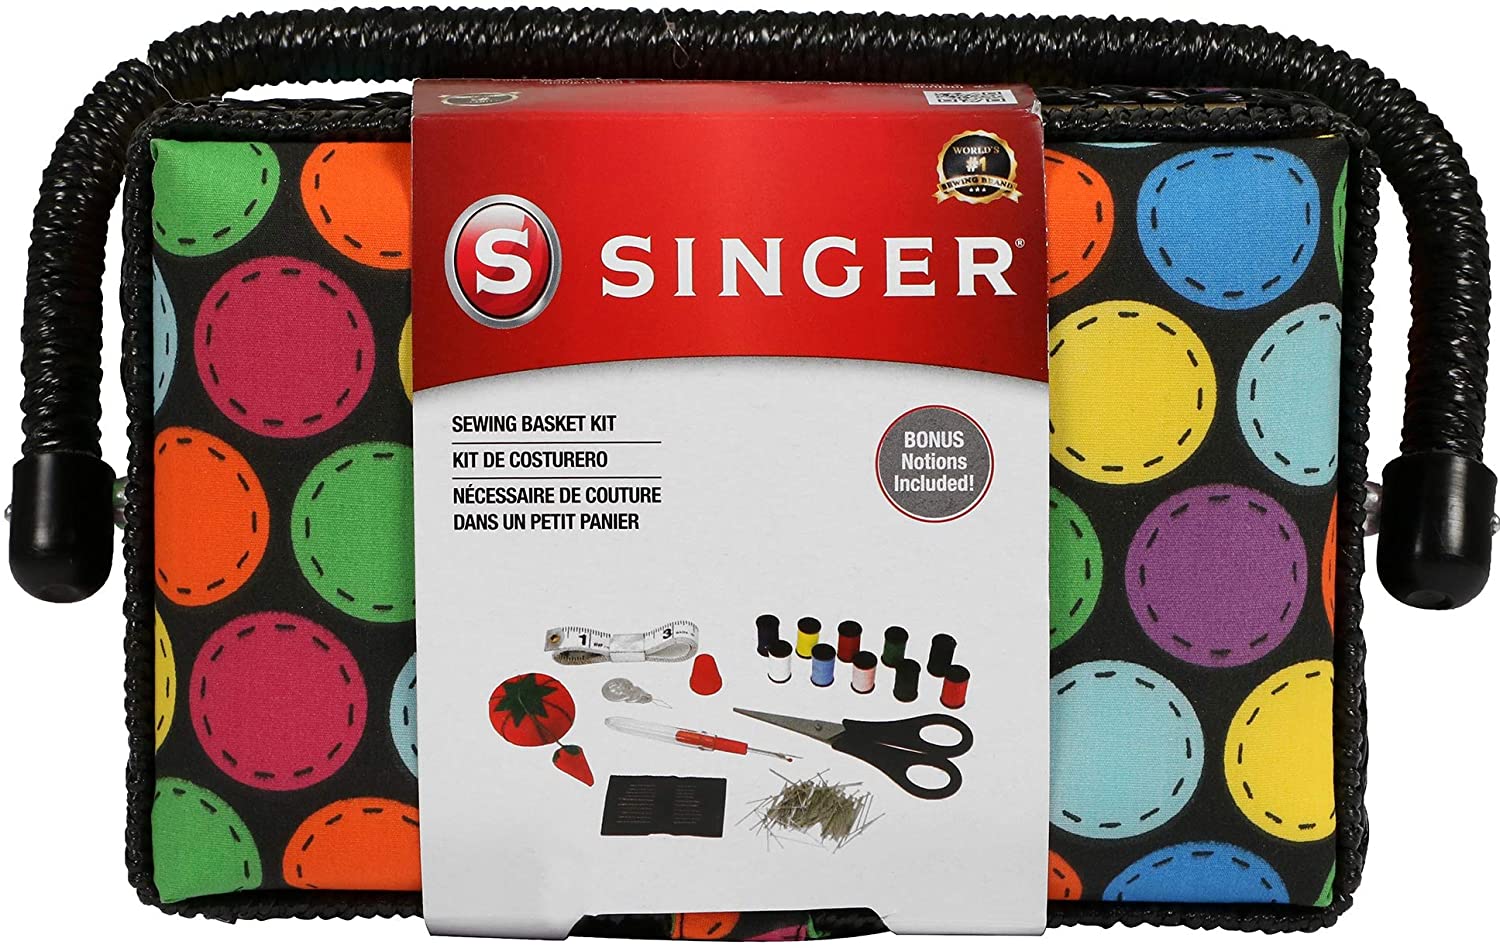 SINGER Small Sewing Basket with Accessories